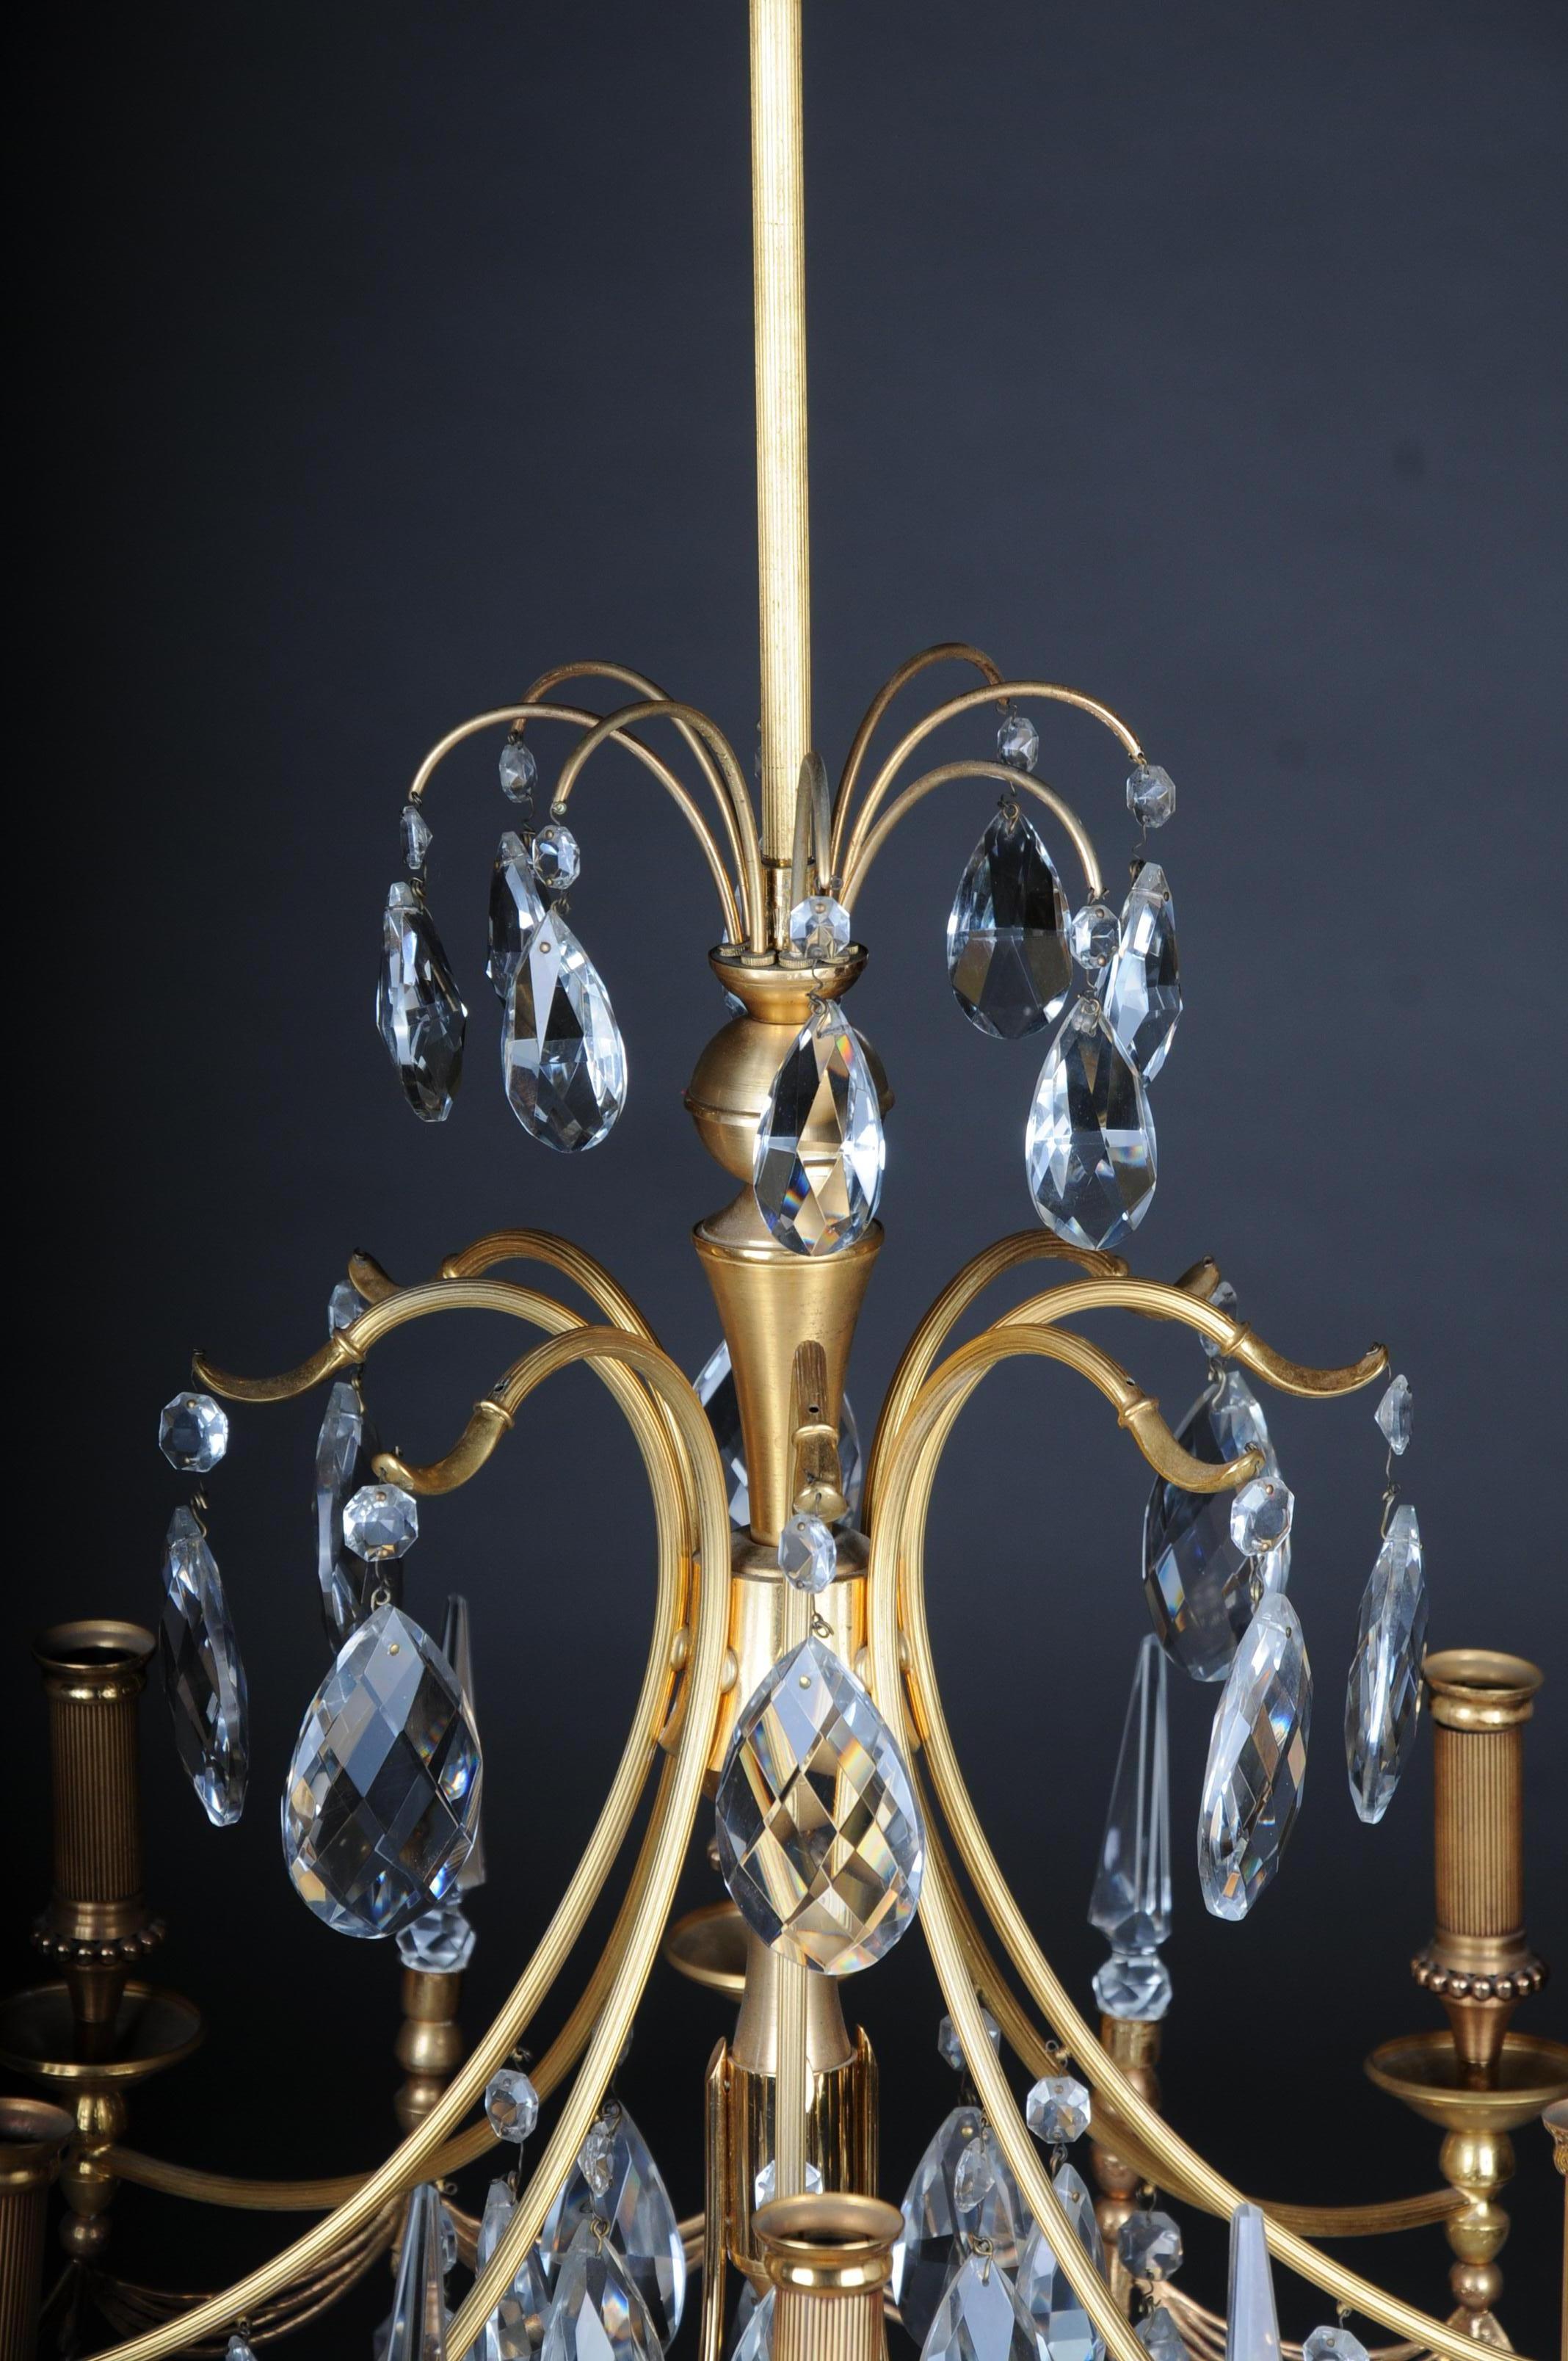 20th century large gold-plated brass chandelier / chandelier

Solid brass gold-plated chandelier with 8 arms, electrified. Prisms and obelisks hangings. Brass body with garlands. Fluted sleeve mounts. Extremely decorative and high quality